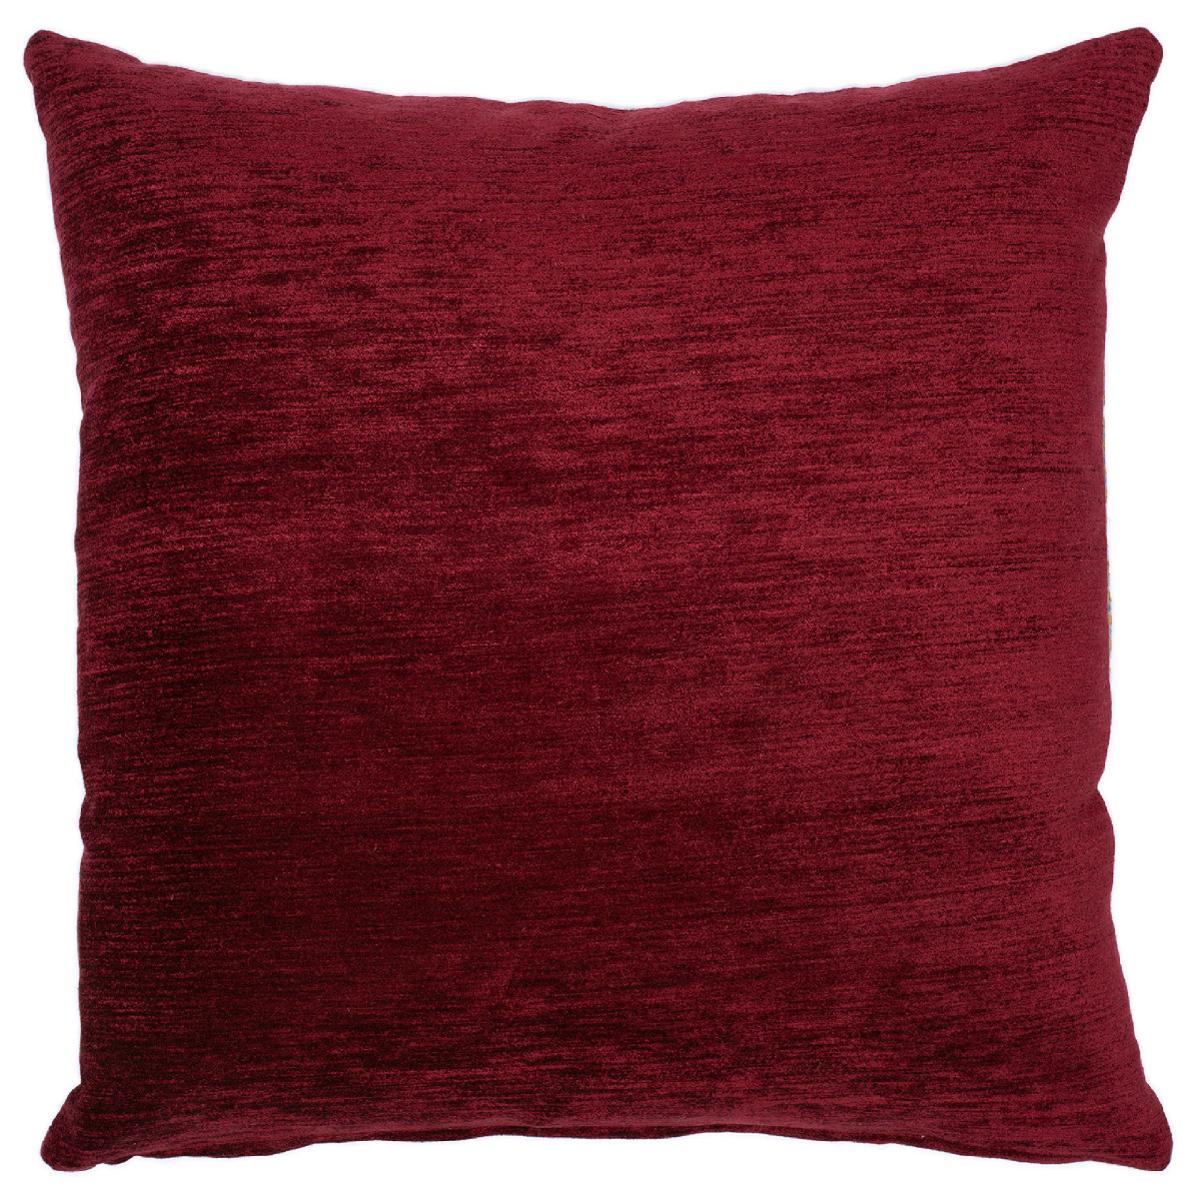 COLOUR: Red 
FRONT MATERIAL: 76% Viscose, 11% Polyester, 13% Cotton Jacquard woven fabric
BACK MATERIAL: Chenille 
FILLER: Feather
STOCK SIZE: 60cm x 60cm (approx)
ORIGIN: Fabric produced in Turkey, cushions made in the UK

Here at Knots we have